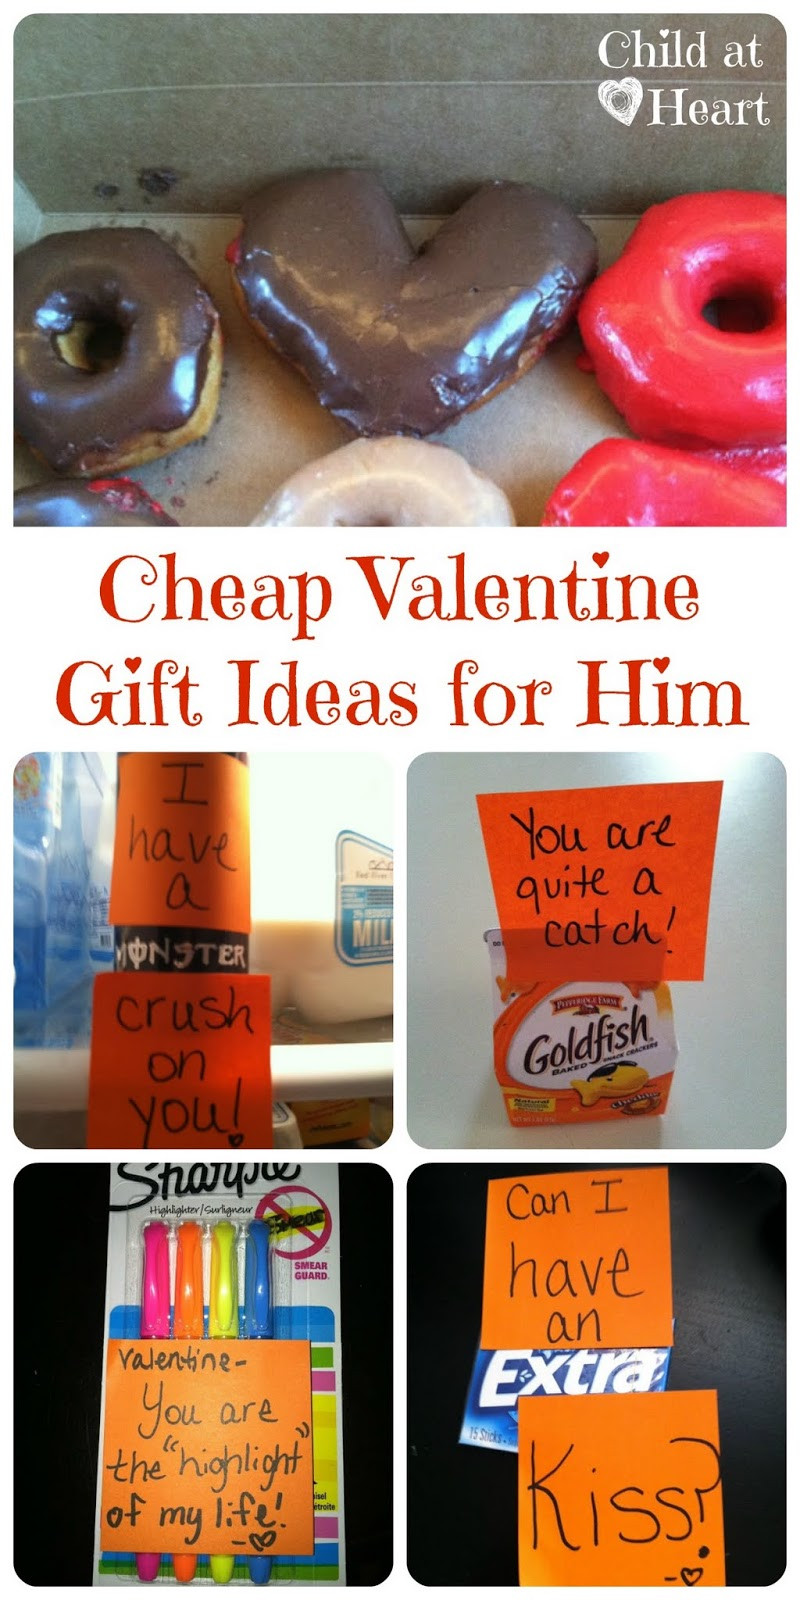 Cute Valentines Day Gift Ideas For Him
 Cheap Valentine Gift Ideas for Him Child at Heart Blog